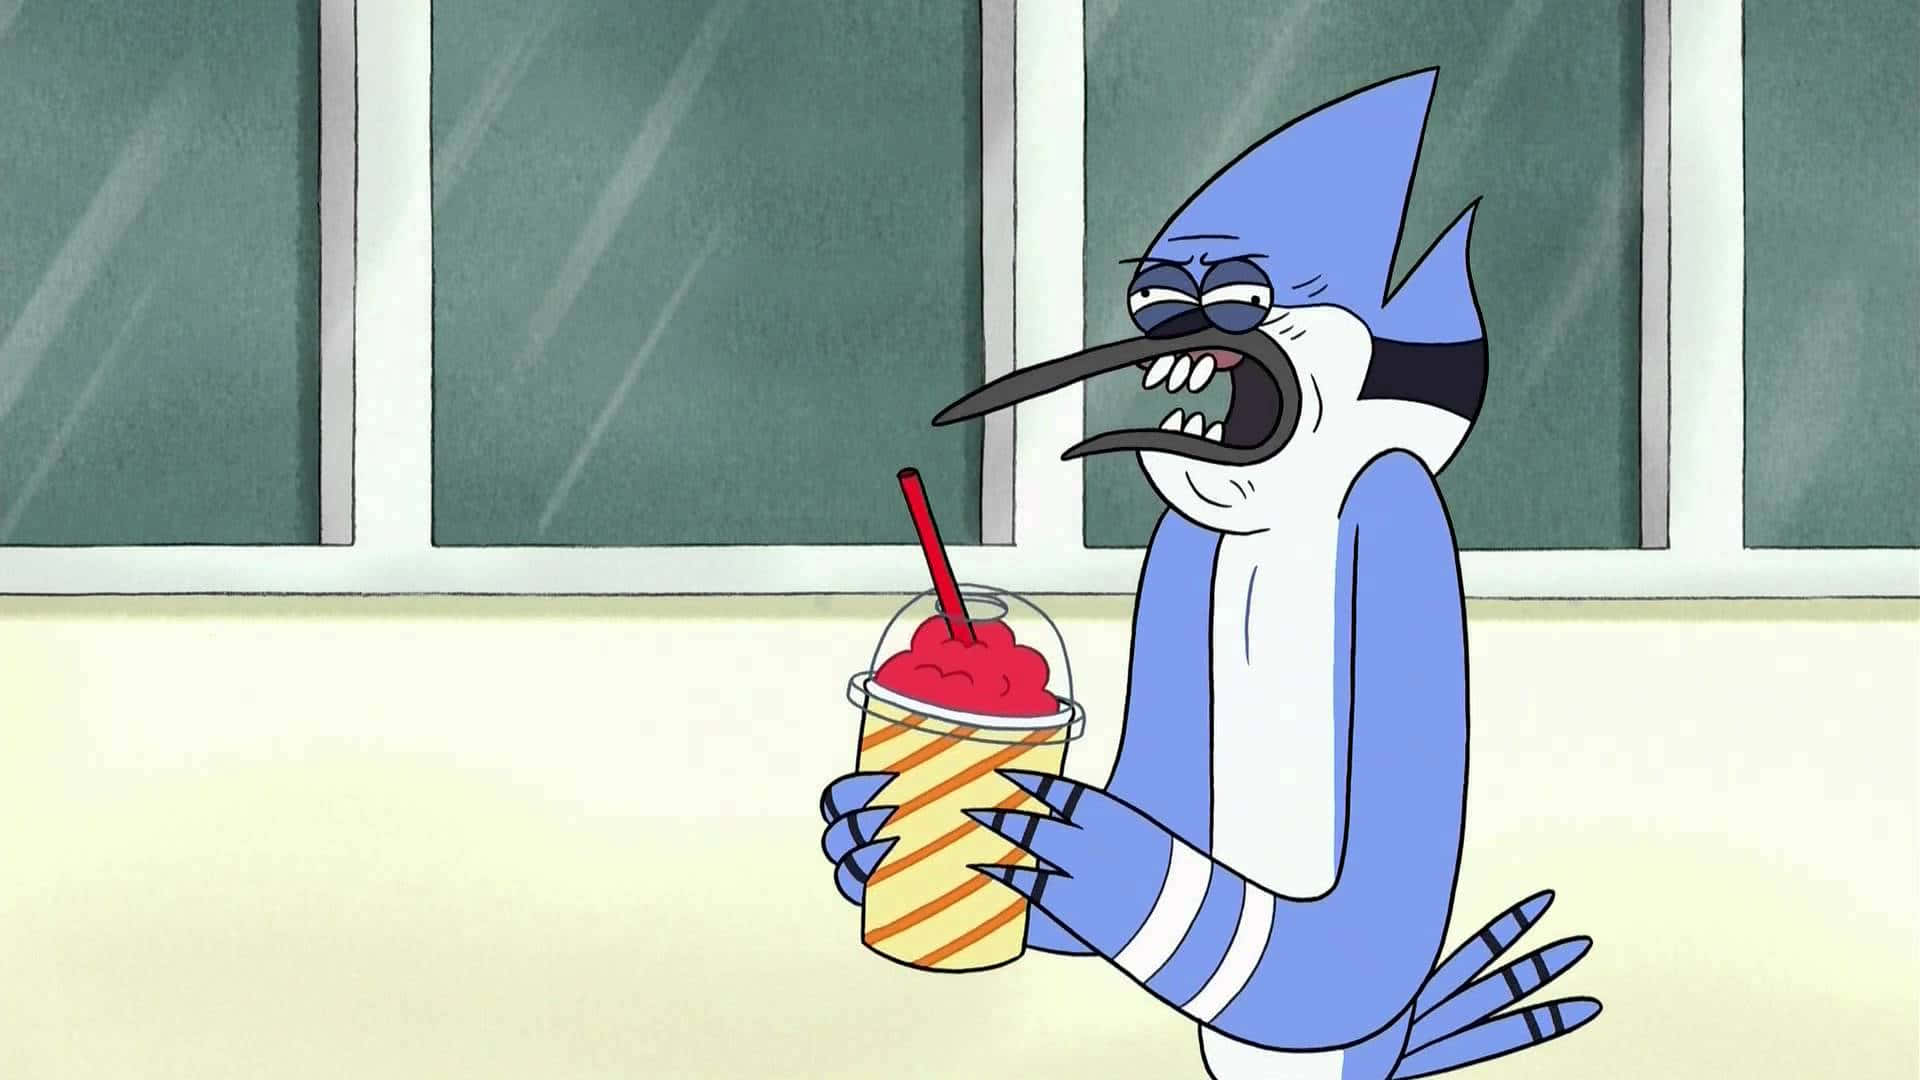 Mordecai and Rigby's Adventure in Regular Show